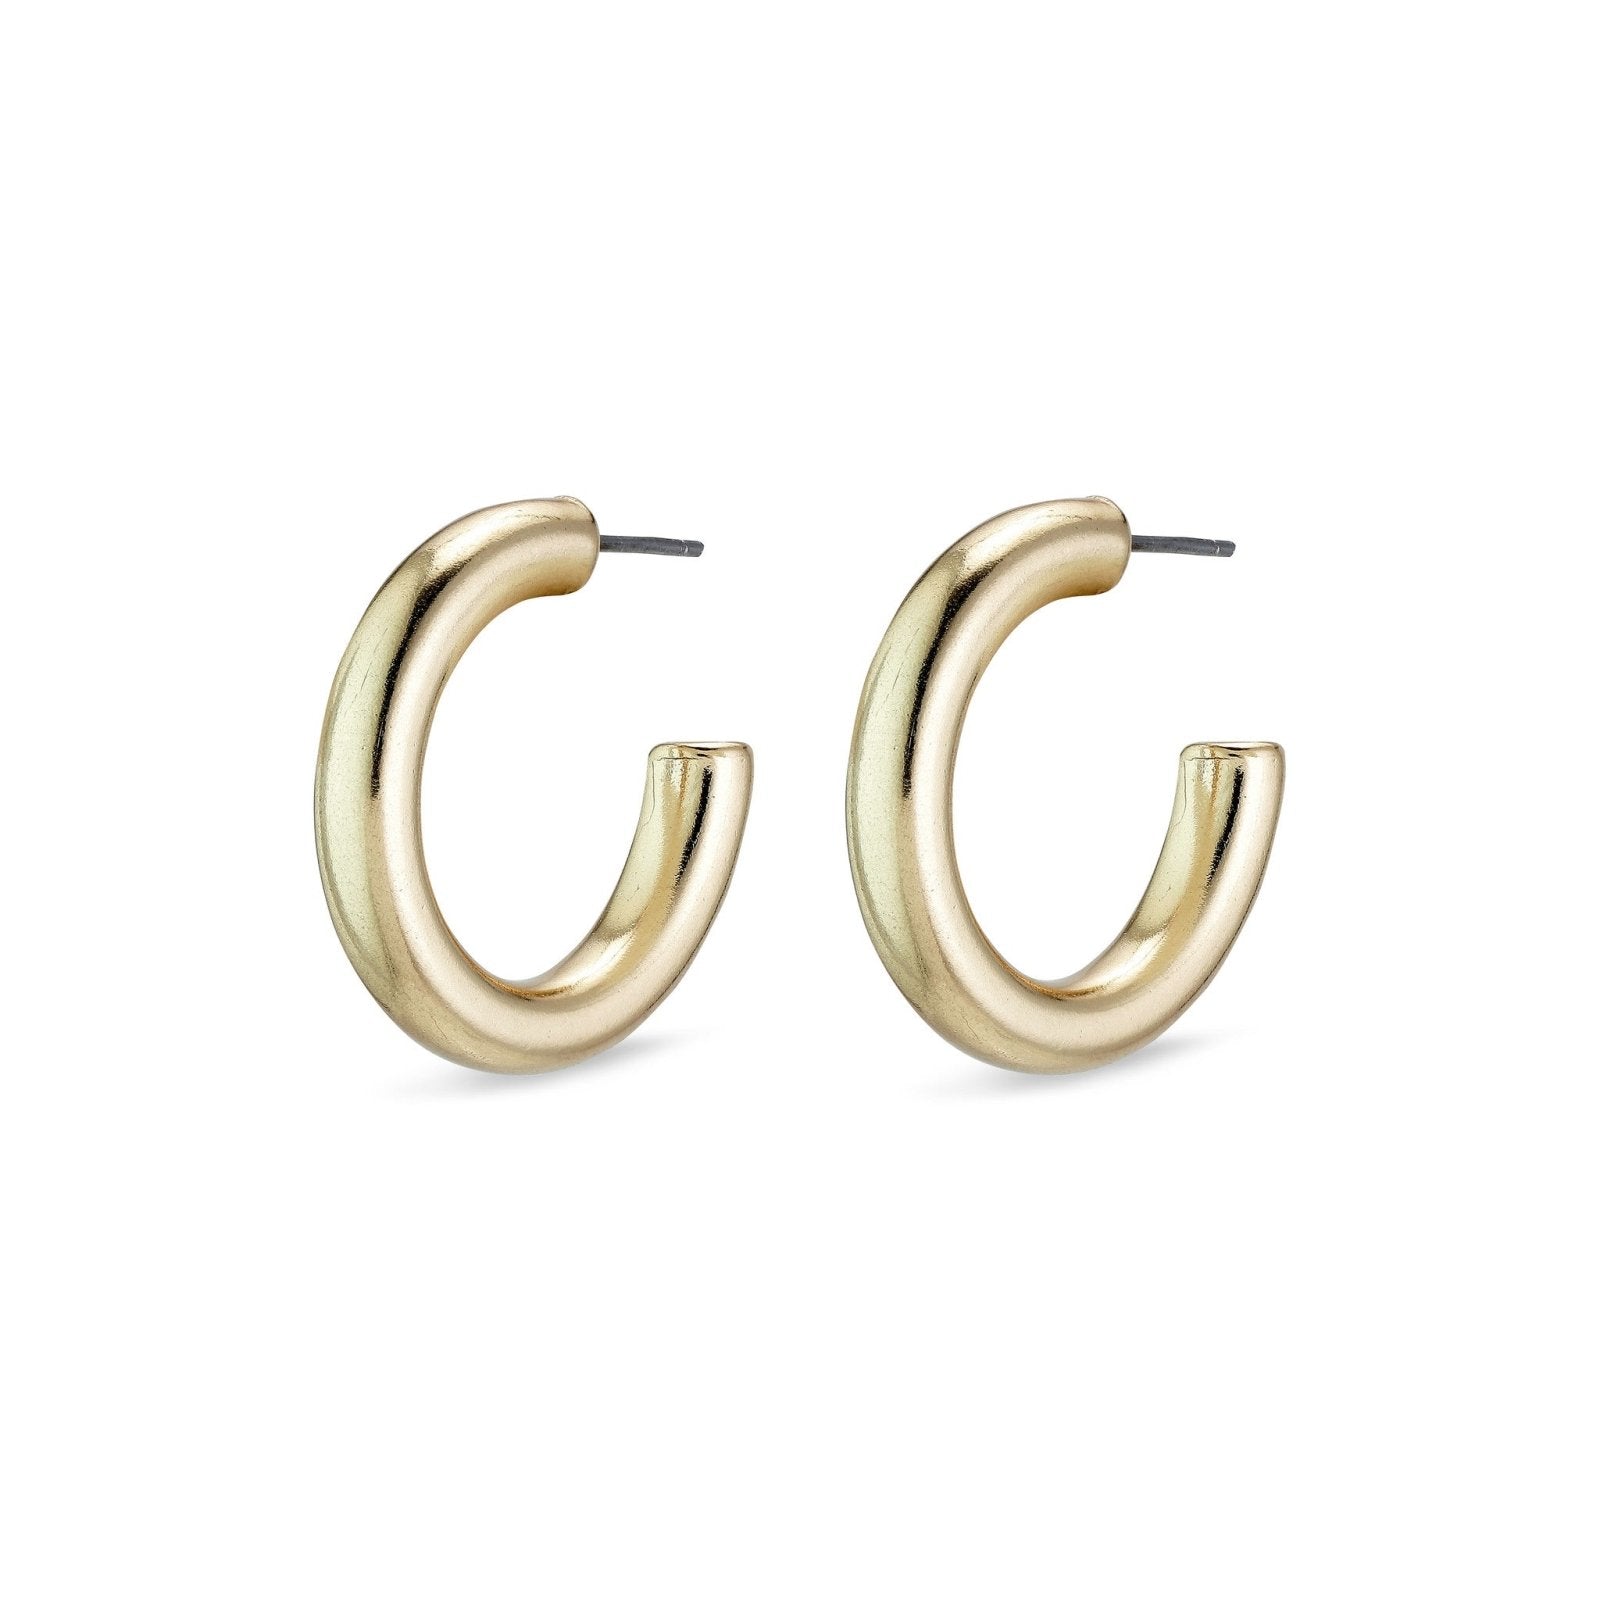 PILGRIM EARRING MADDIE GOLD PLATED - Boutique Homies